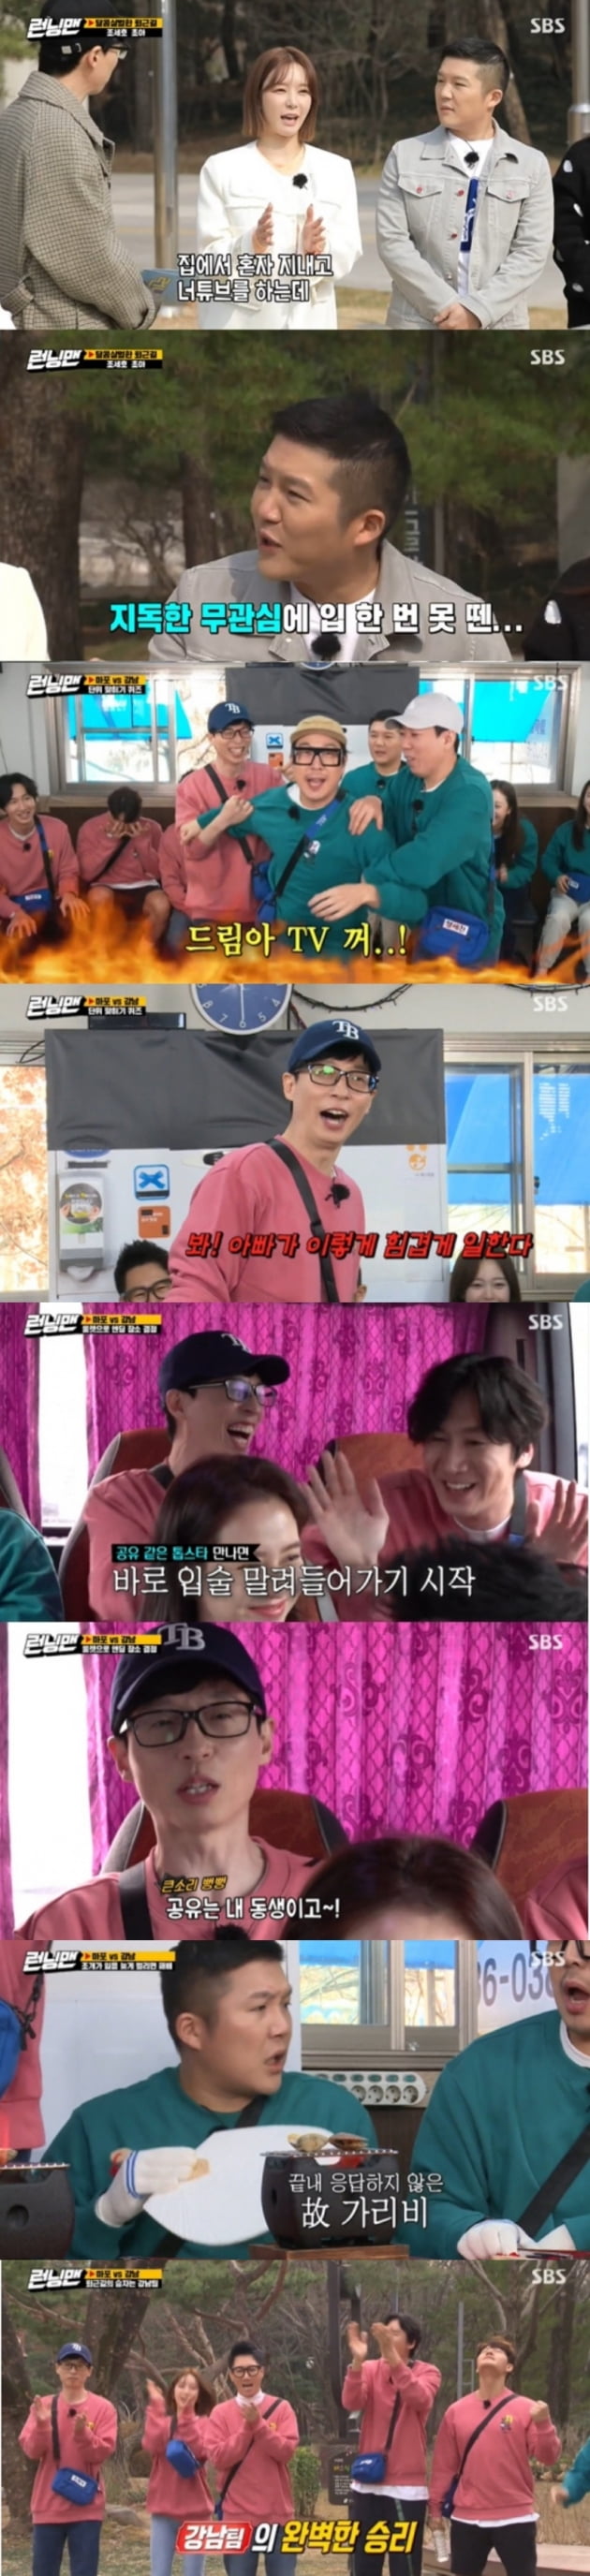 SBS Running Man Lee Kwang-soo disclosures the privacy of Yoo Jae-Suk.Running Man, which aired on the 11th, ranked first in the same time zone with an average of 2.5% of the 2049 ratings (hereinafter based on Nielsen Korea and the metropolitan area), and the highest audience rating per minute jumped to 6.5%.On this day, Race was decorated with Sweet and bloody work route race which is going to work after the ending shooting in the winning team area, and Jo Se-ho and Park Choa were invited as guests.Yoo Jae-Suk, Ji Seok-jin, Kim Jong-kookook, Lee Kwang-soo, Park Choa were the Gangnam District Team, with Haha, Song Ji-hyo, Jeon So-min, Yang Se-chan, and Jo Se-ho being divided into DJ Maphorisa Team, Gangnam District Team Kim Jong-kook Cook took first place in the pre-mission and decided to set the first mission place as Banpo.The first mission was a quiz, and the Gangnam District team, which was filled with brains, cheered.However, unexpectedly, the Gangnam District team was struggling, and DJ Maphorisa team took the victory by hitting the quiz problem in succession.DJ Maphorisa team Choices Dongbinggo-dong as next mission siteOn the move, Park Choa and Jo Se-ho laughed with various recent stories.Park Choa, who has been with Running Man in six years, has always attracted attention with a bright expression, saying, I have been lying down and watching TV for three years.Jo Se-ho disclosed the privacy of Lee Kwang-soo and Yoo Jae-Suk with health field talk.Jo Se-ho described Lee Kwang-soos distorted expression, saying, Lee Kwang-soo exercises with the weight that should not be.Lee Kwang-soo said, Yoo Jae-Suk comes out of the gym and points out when he meets Jo Se-ho, but when he meets someone like Gong Yoo, his lips dry.On the other hand, the Gangnam District team won all the missions in Dongbinggo-dong and Gangnam District, preoccupied the advantageous highlands, and won the final mission in Yeoksam-dong with Park Choas performance.In the end, the final ending area was also Choicesed to Gangnam District, which secured a lot of roulette compartments, and Gangnam District Ending was conducted.The Gangnam District team took the famous rice cake set of Gangnam District, and DJ Maphorisa team had the bad luck of going to a long workday.The scene was the highest audience rating of 6.5% per minute, accounting for the best one minute.a fairy tale that children and adults hear togetherstar behind photoℑat the same time as the latest issue